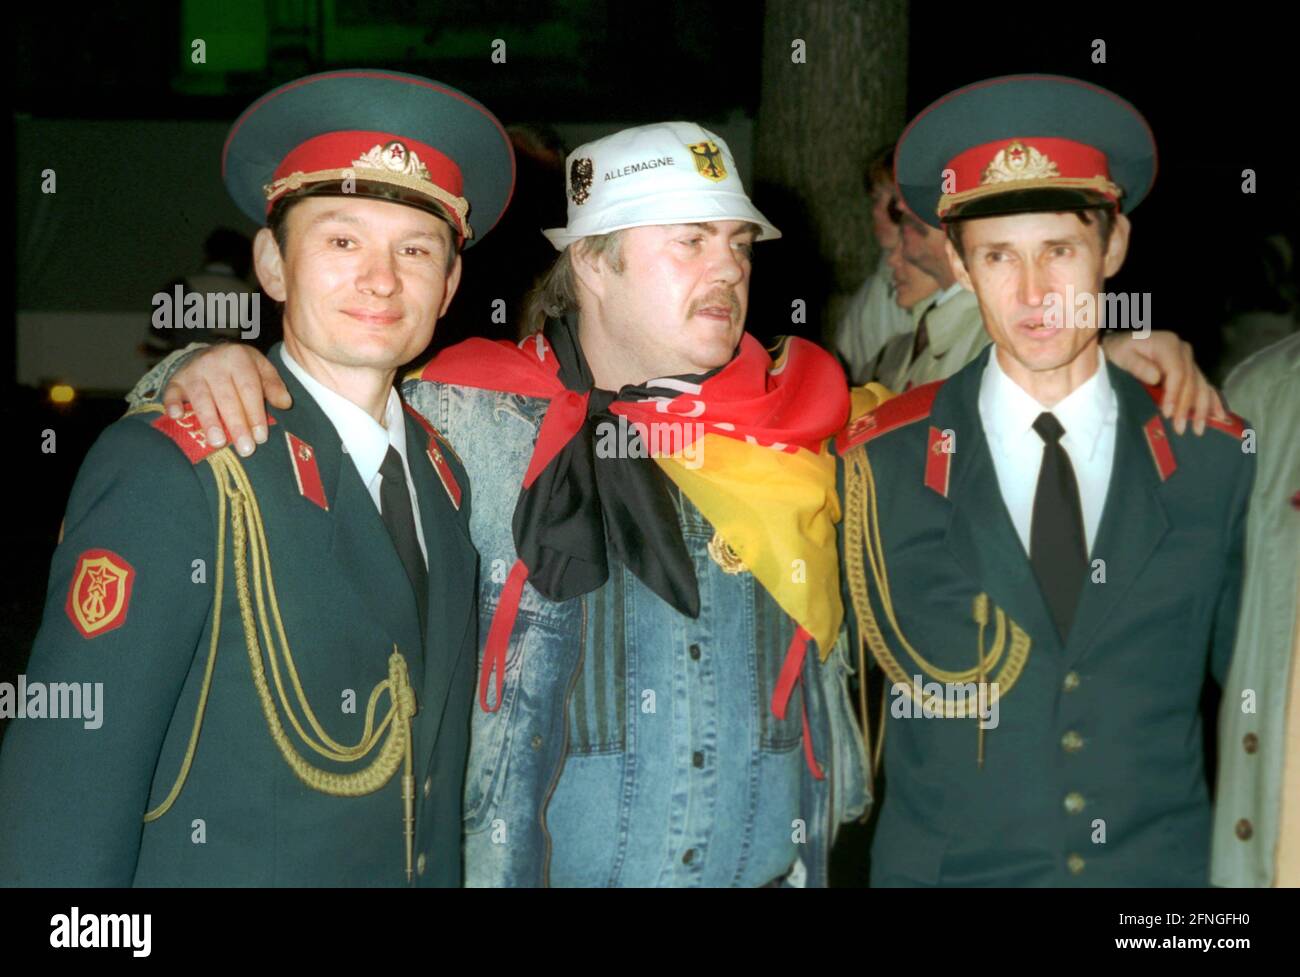 Berlin districts / Mitte / GDR / October 3, 1990 Celebration of German Unity, the GDR ceases to exist. Russian (Soviet) soldiers and a German fraternize // Russia / Unity / Allies / History / Soviets [automated translation] Stock Photo